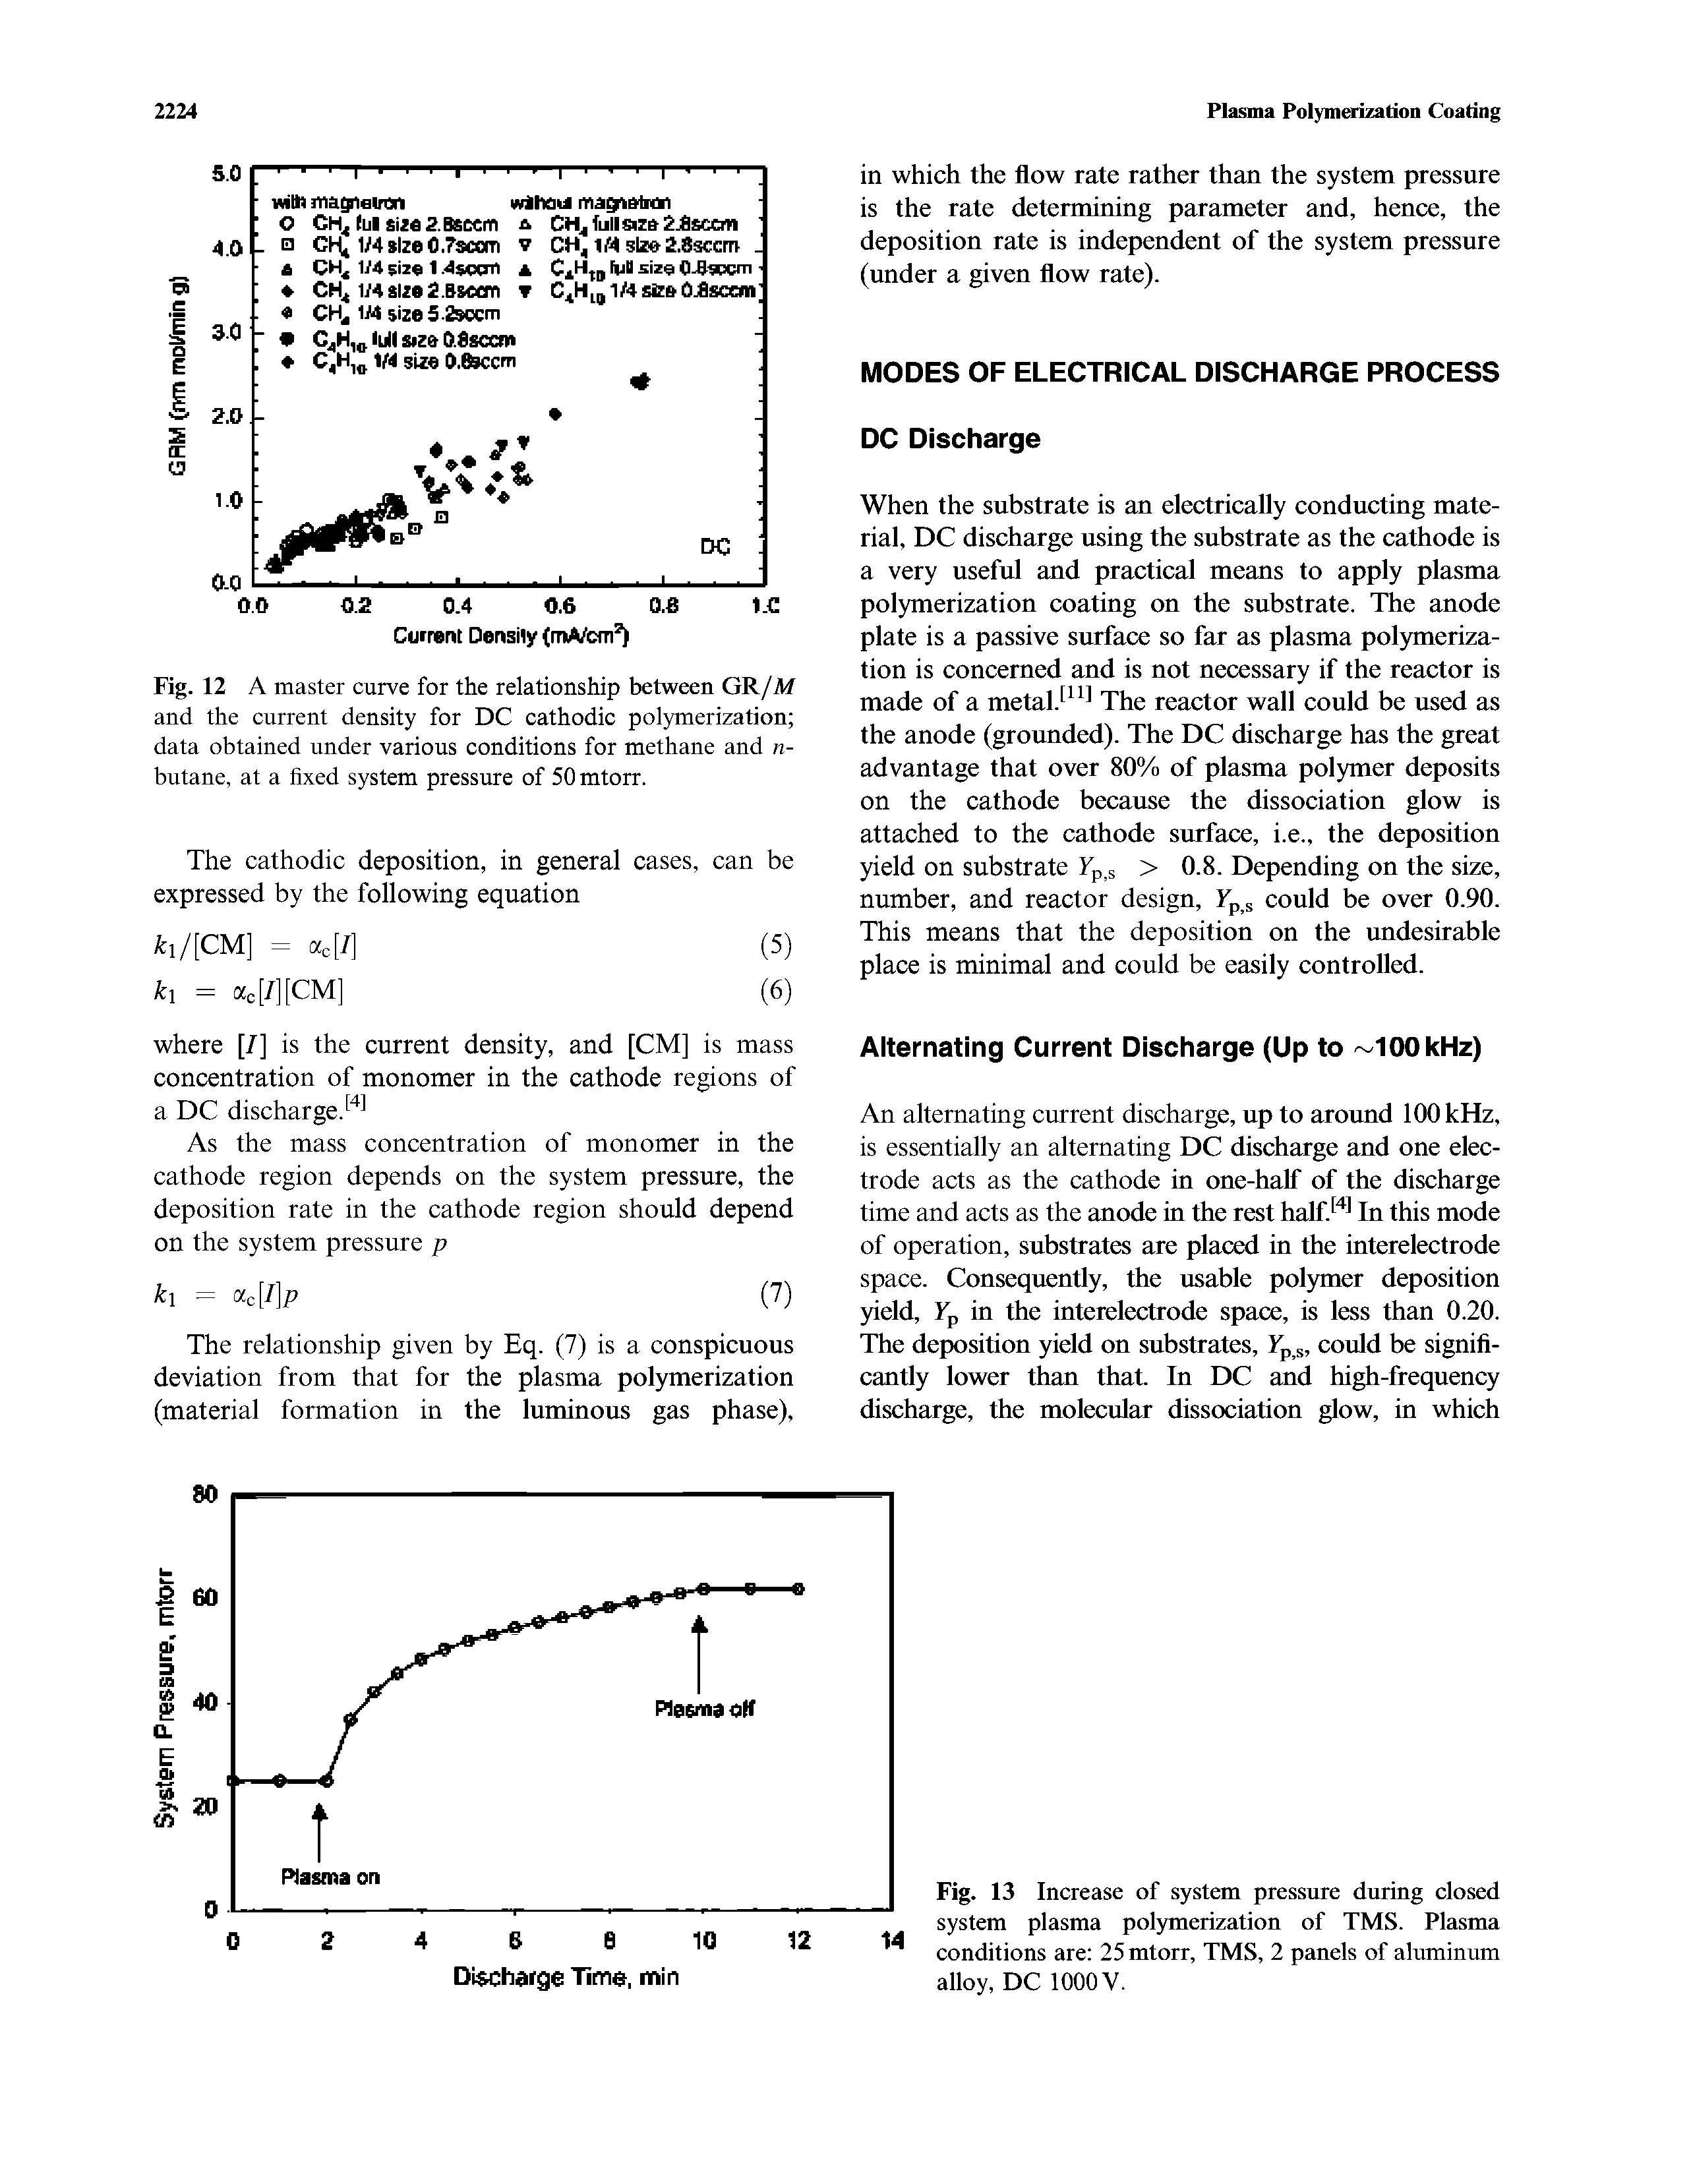 Fig. 13 Increase of system pressure during closed system plasma polymerization of TMS. Plasma conditions are 25 mtorr, TMS, 2 panels of aluminum alloy, DC 1000 V.